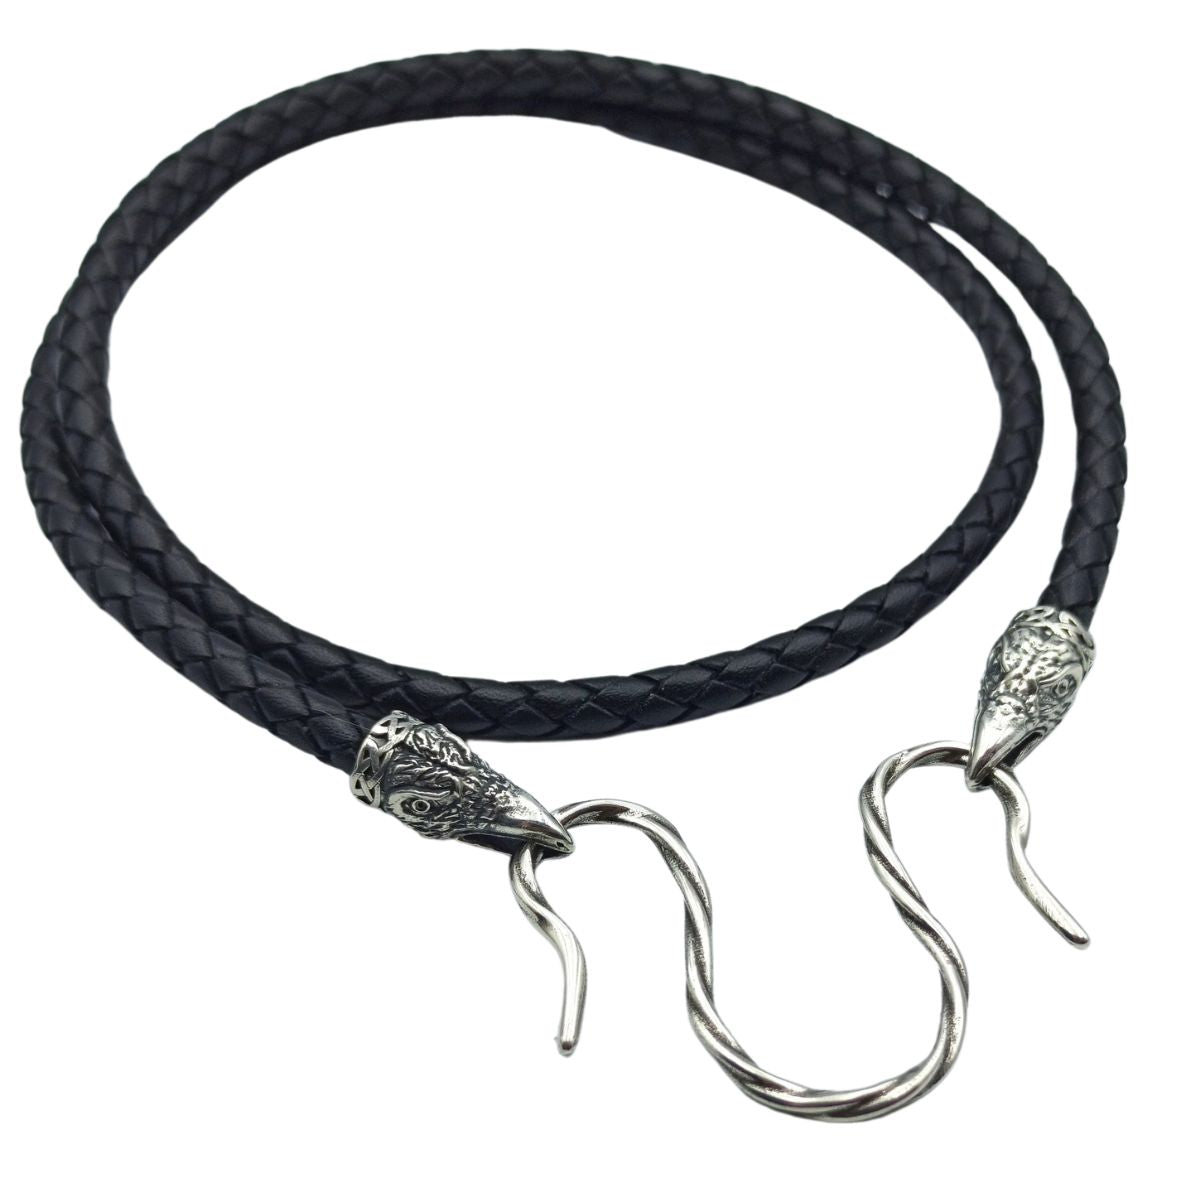 Raven leather necklace with Silver clasps 45 cm | 17 inch  